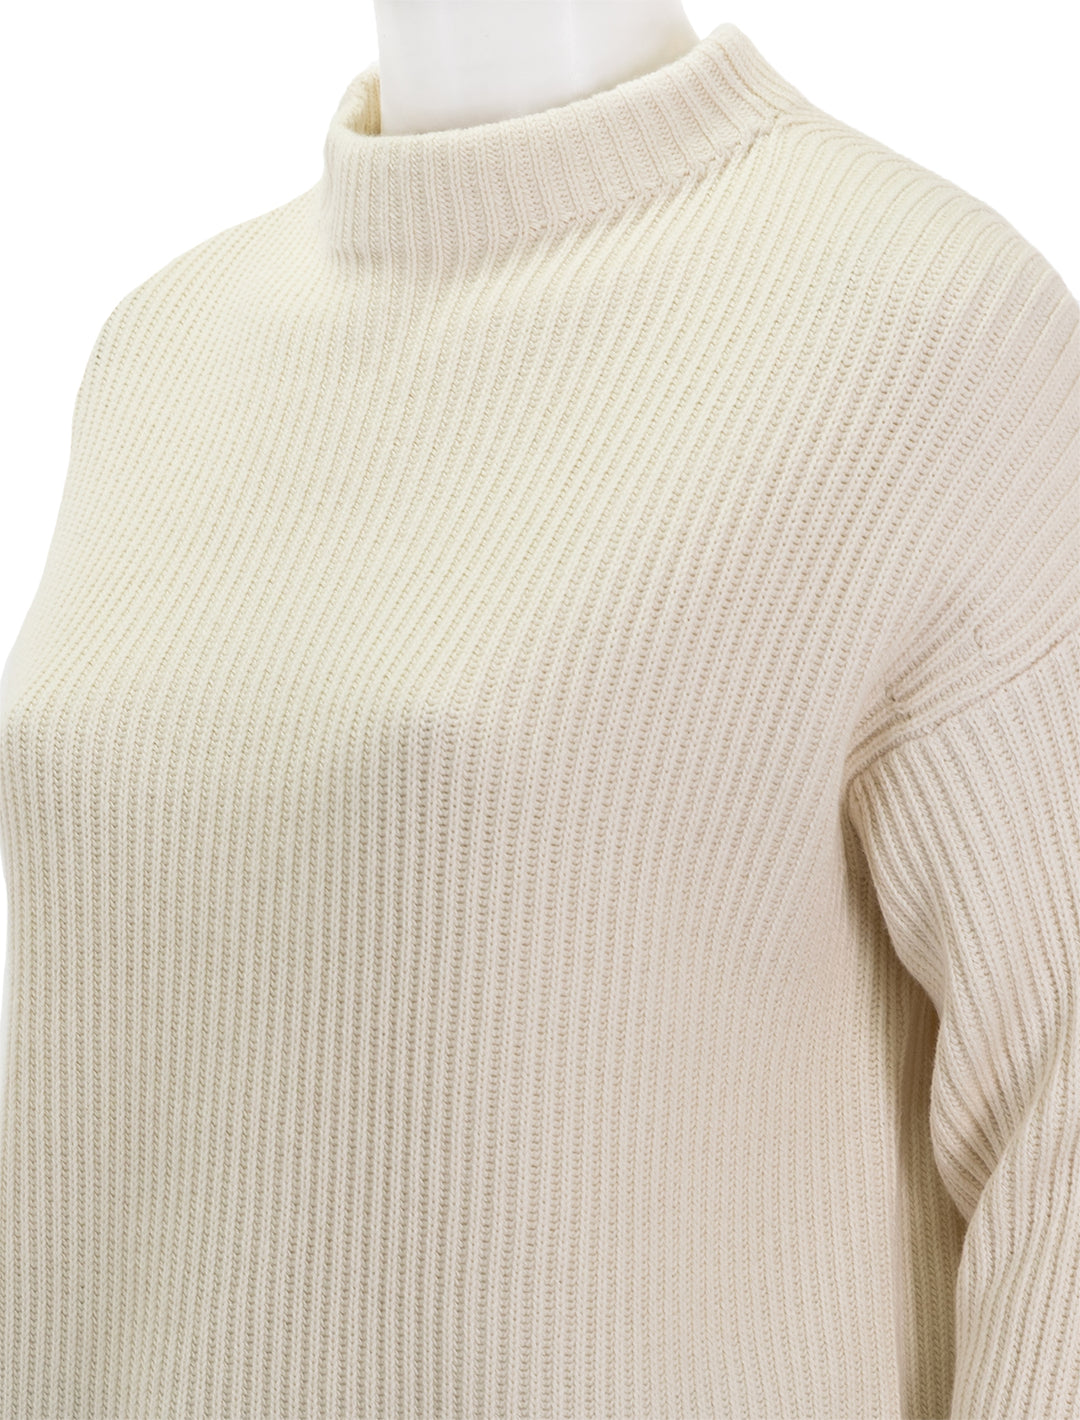 Close-up view of Vince's ribbed funnel neck in ivory.